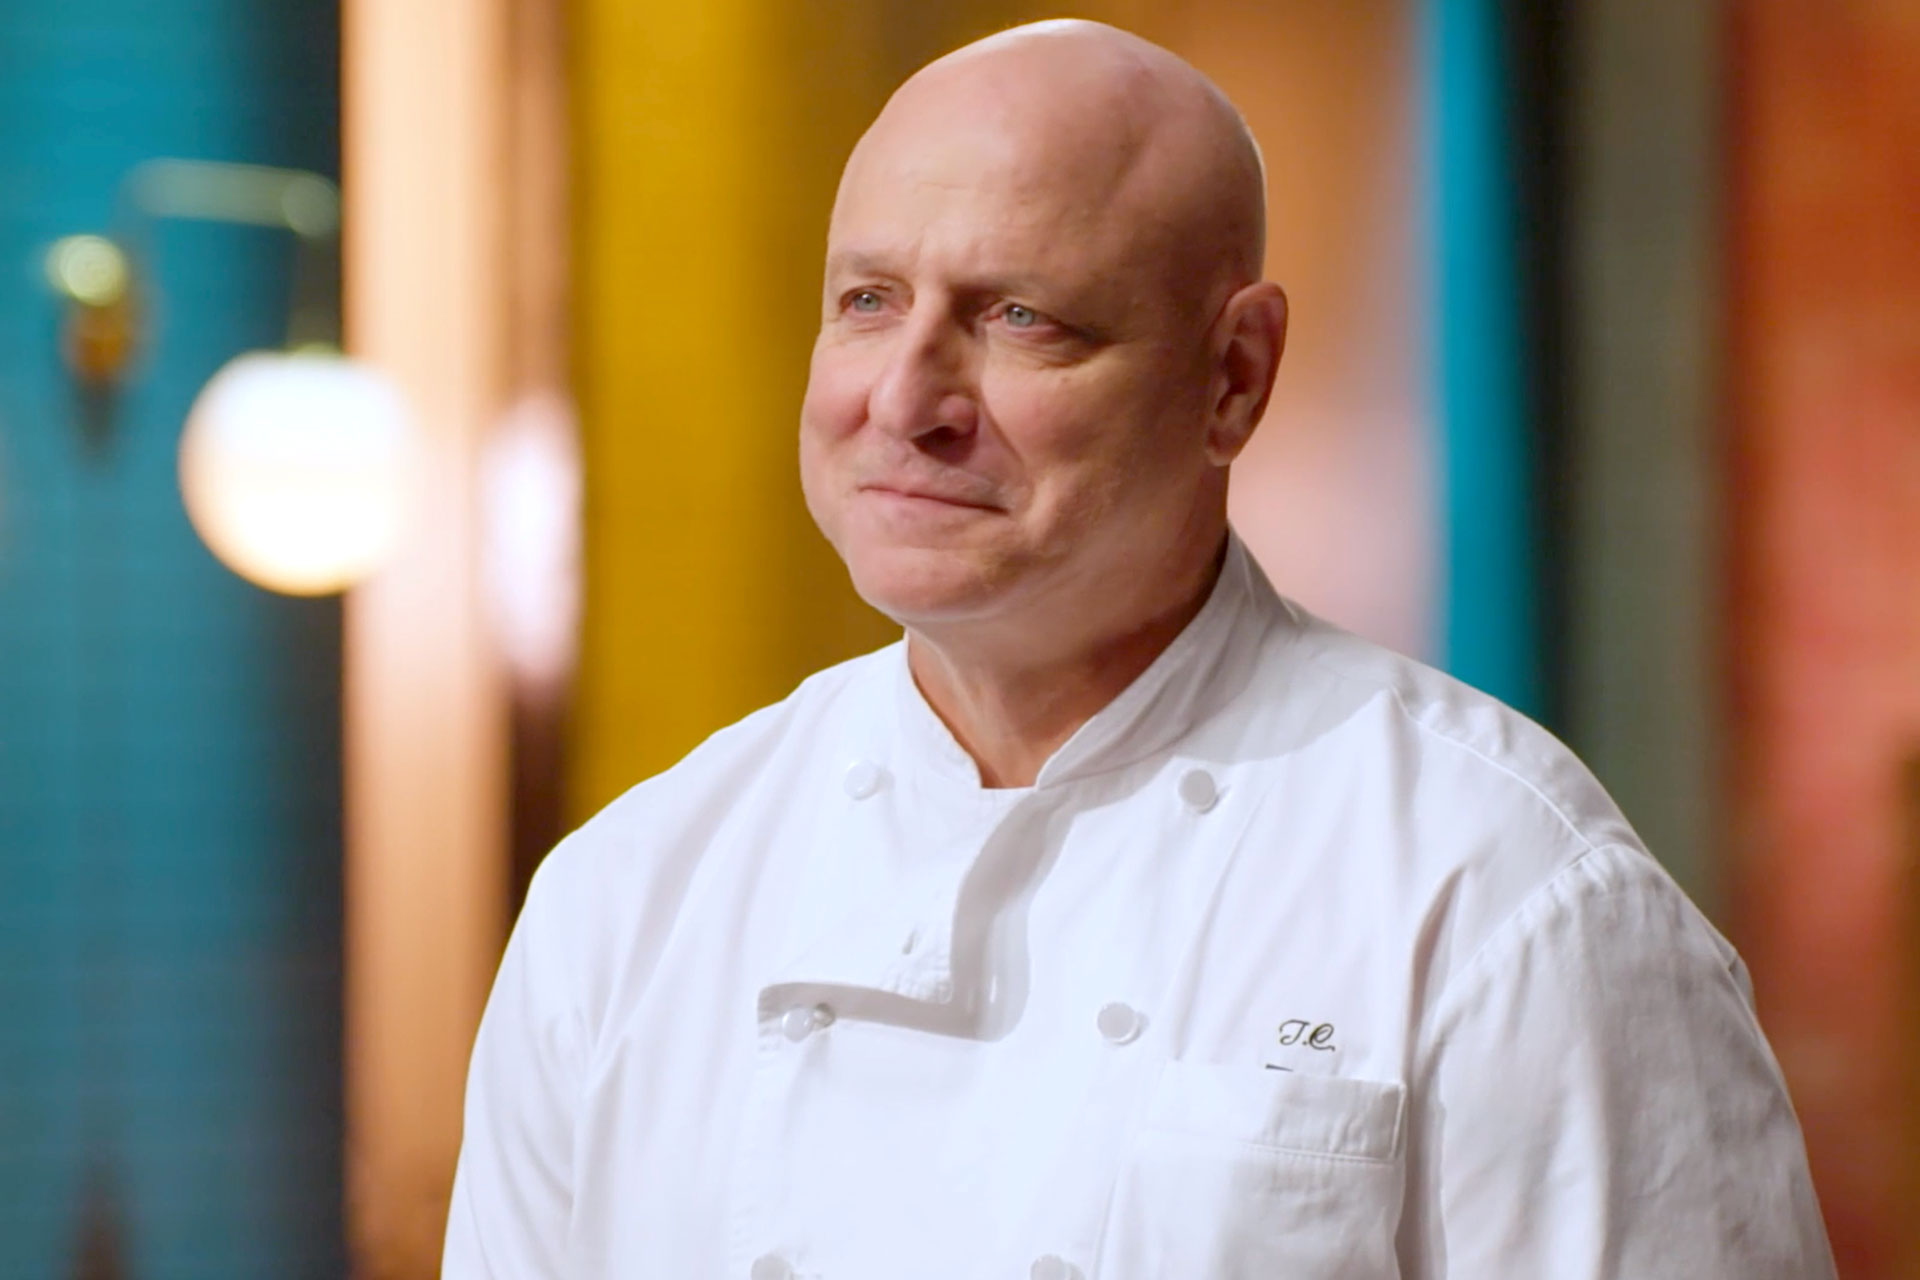 Who Won Top Chef Last Chance Kitchen Last Night? The Daily Dish